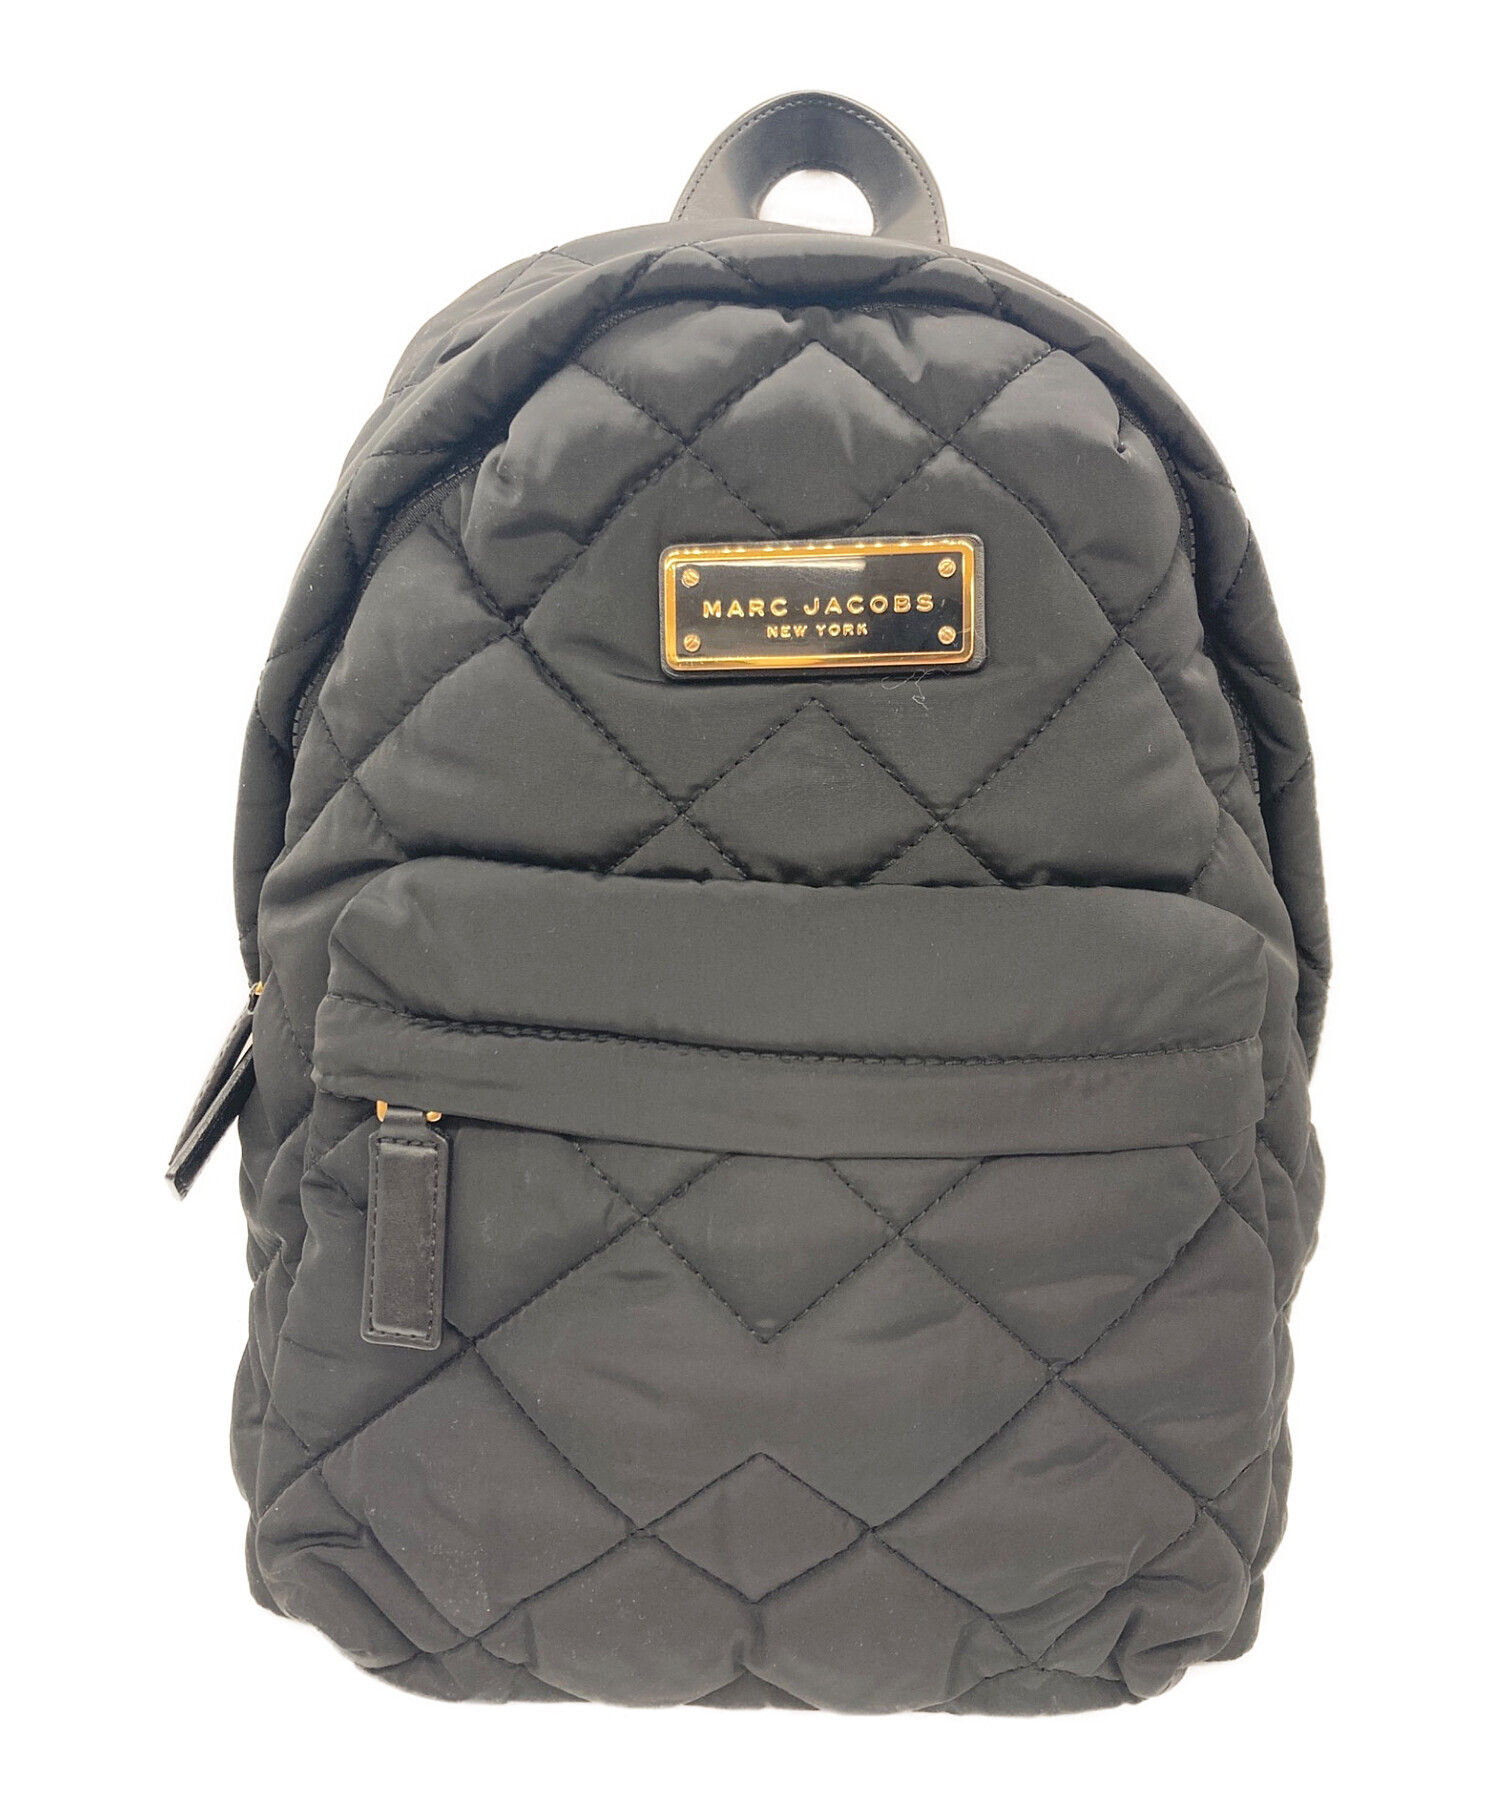 MARC JACOBS BACKPACK